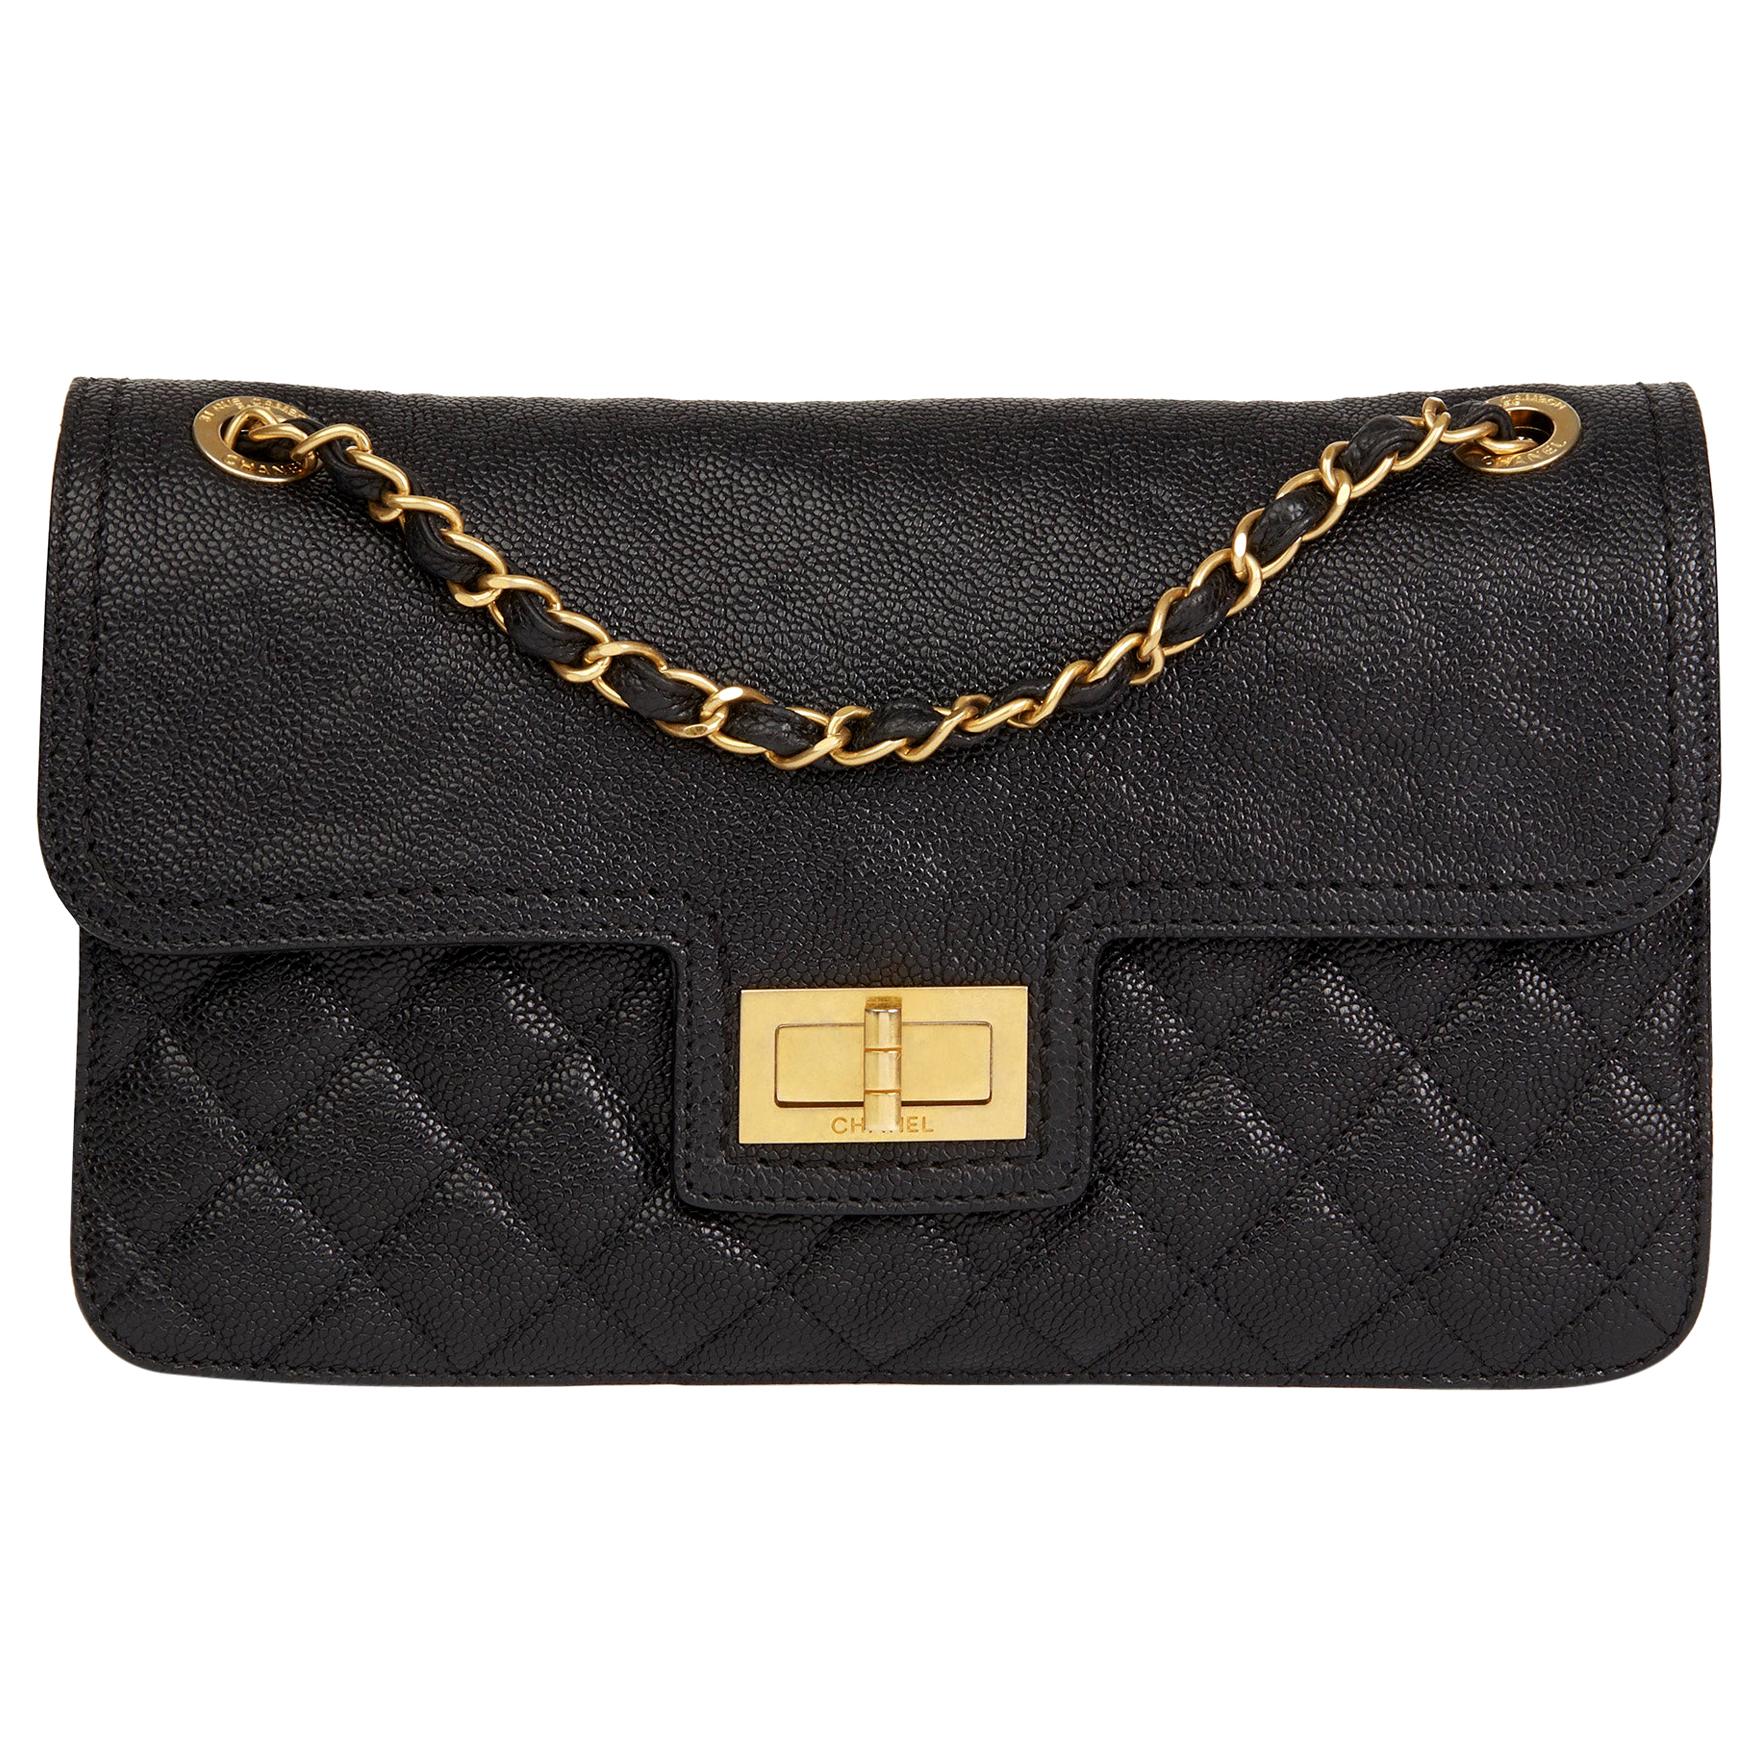 2012 Chanel Black Quilted Caviar Leather 2.55 Reissue Classic Single Flap Bag